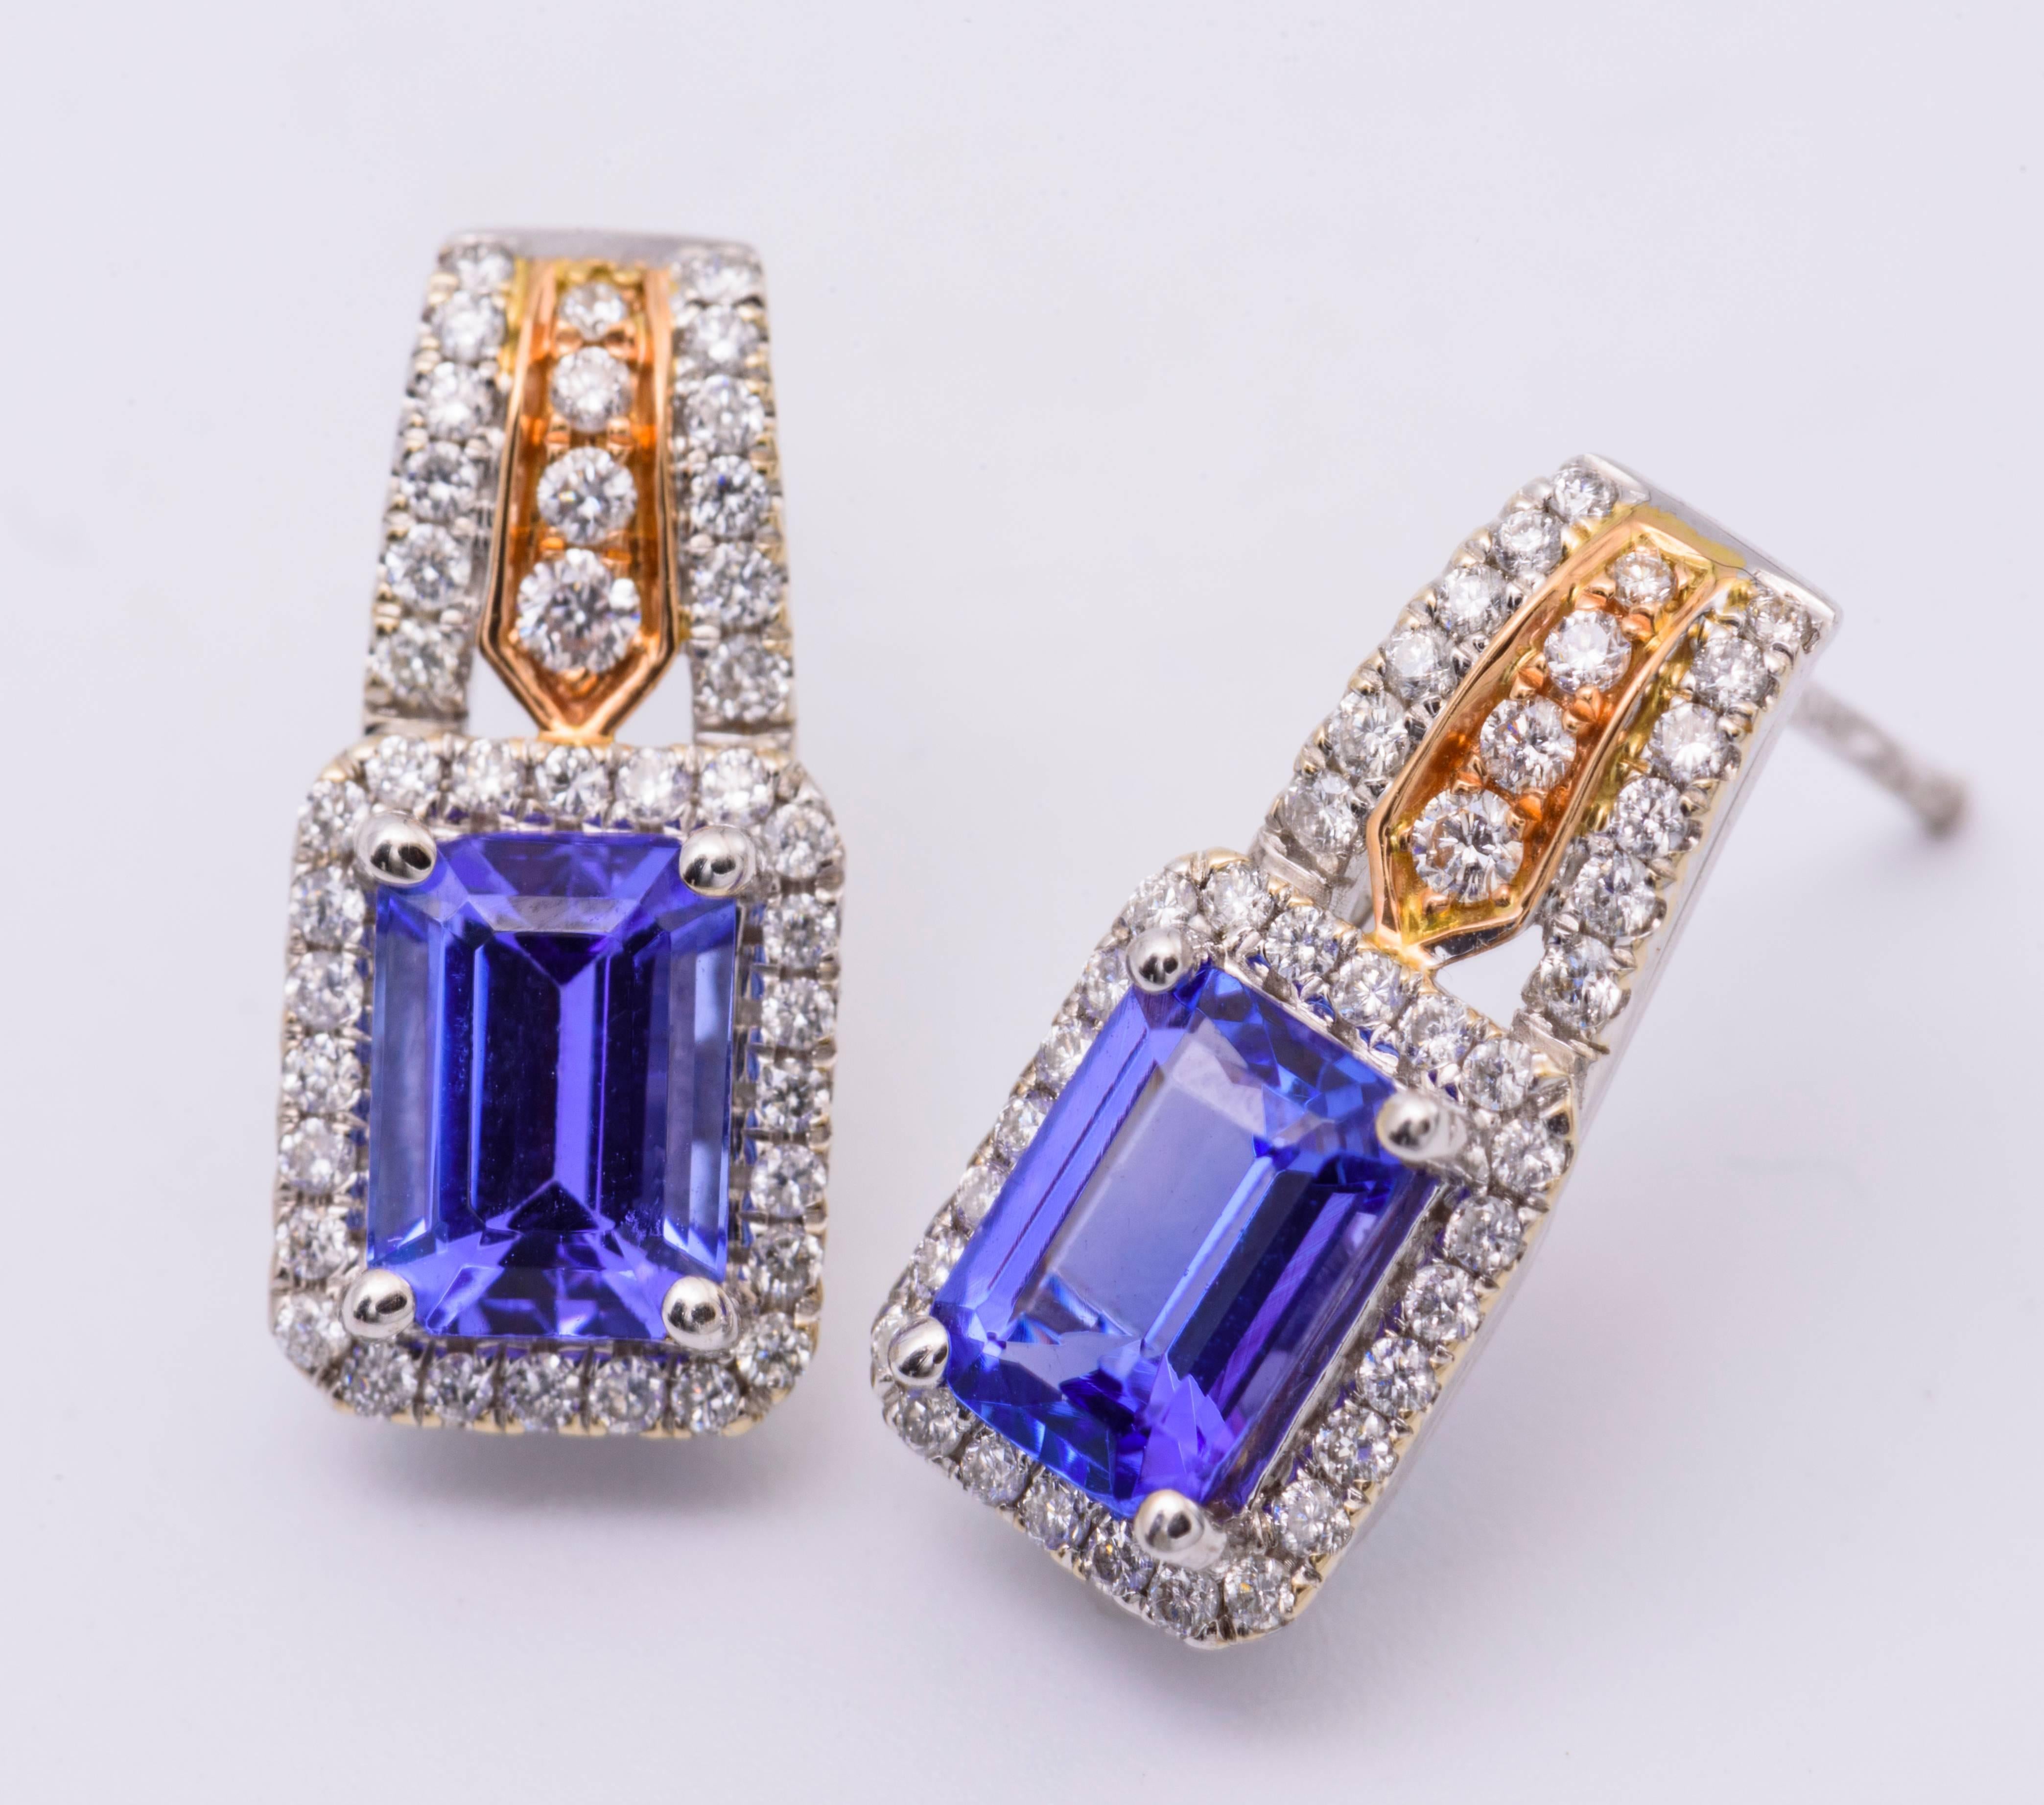 Tanzanite measuring each 7 x 5 mm for a total weight of 2.18 Cts.
Diamonds 0.47 Cts.
14K white and yellow gold
Earring measuring : 17 x 8 mm
All our gemstones are genuine and are sourced with the highest degree of integrity.